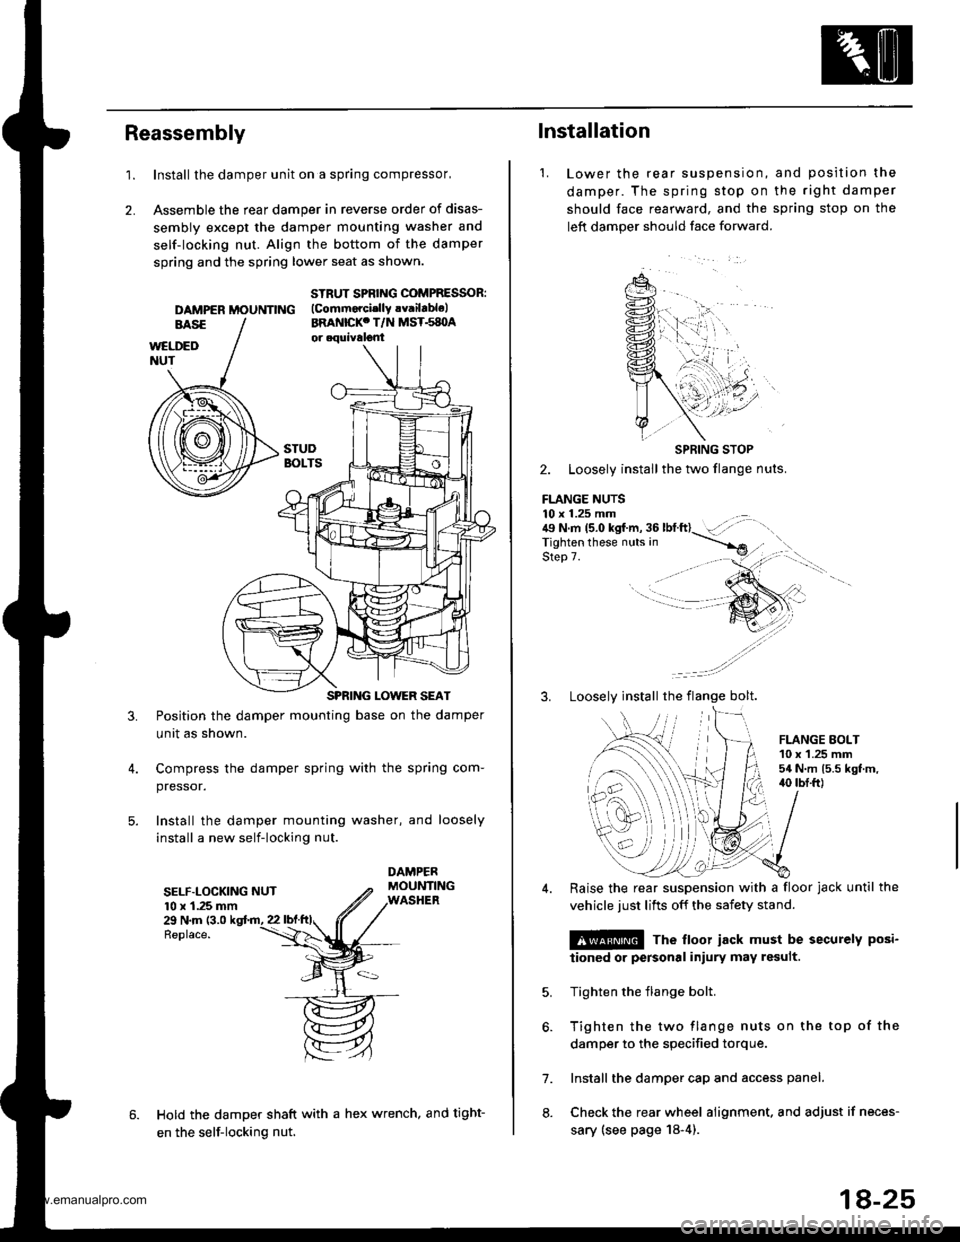 HONDA CR-V 2000 RD1-RD3 / 1.G Owners Manual 
Reassembly
1.Install the damper unit on a spring compressor,
Assemble the rear damper in reverse order of disas-
sembly except the damper mounting washer and
self-locking nut. Align the bottom of the